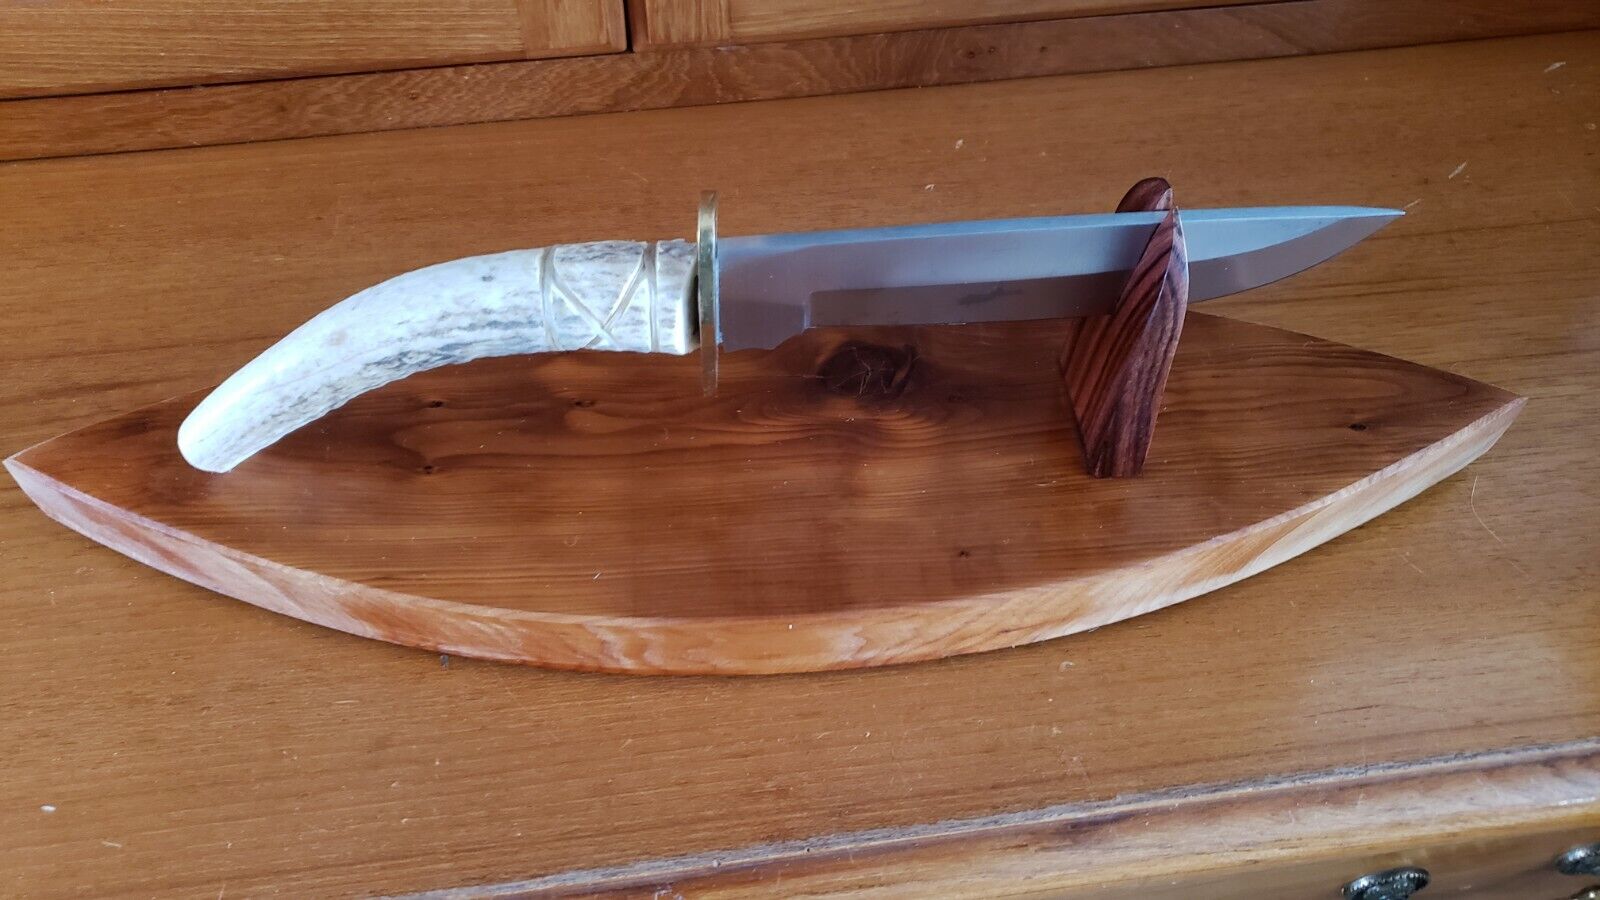 7 Inch Stainless Blade 6 Inch Antler Handle.  18 Inch 5 Inch Wide Maple Base